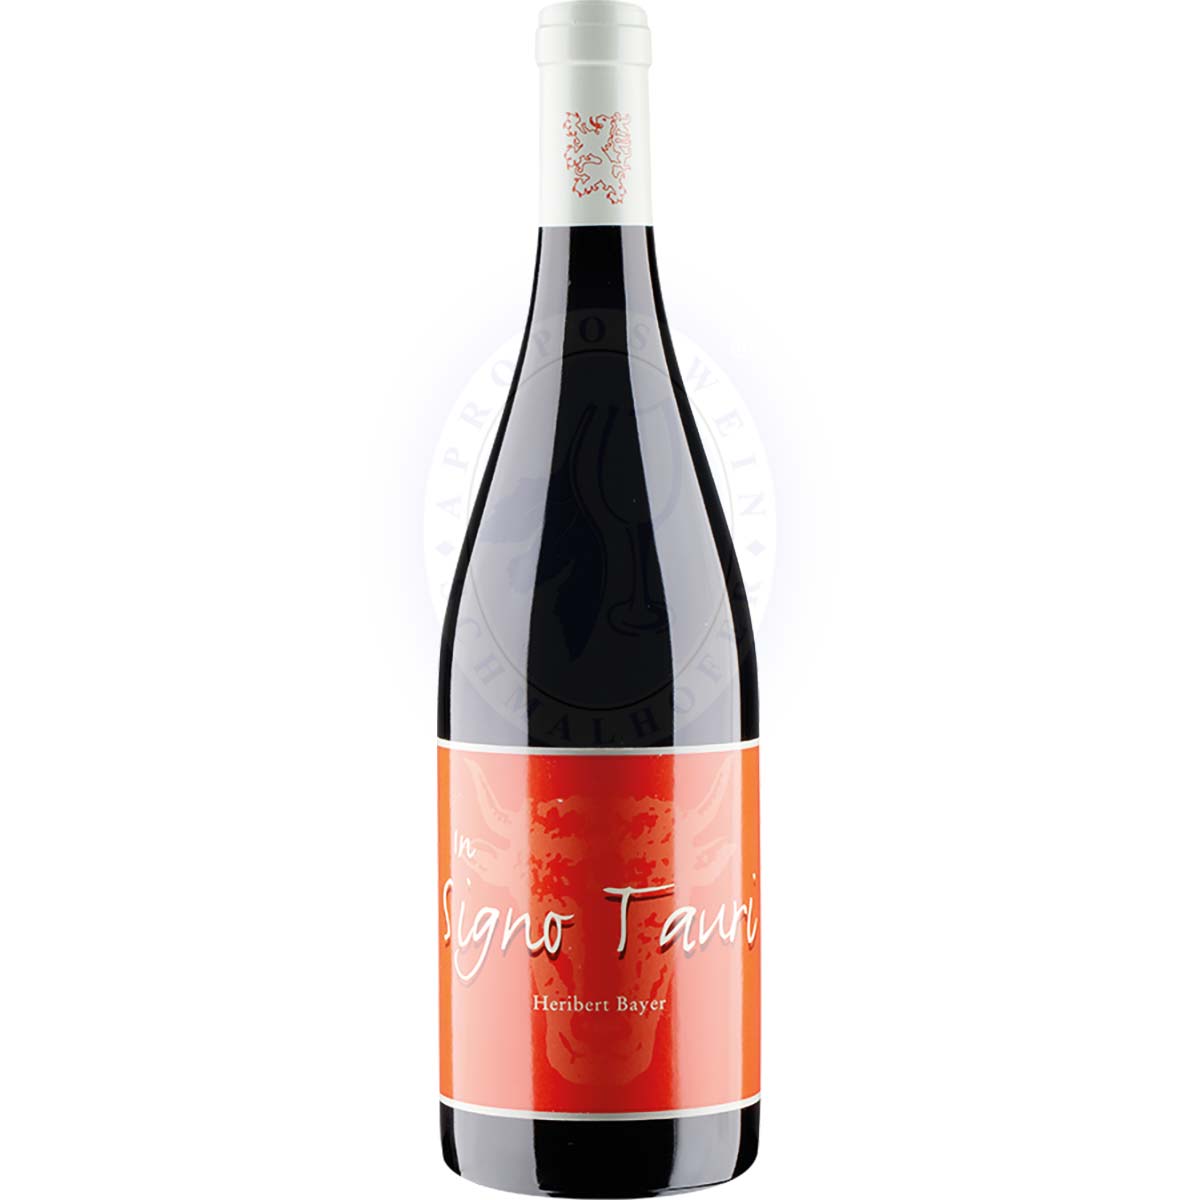 Bayer Pinot Noir In Signo Tauri 2019 0,75l